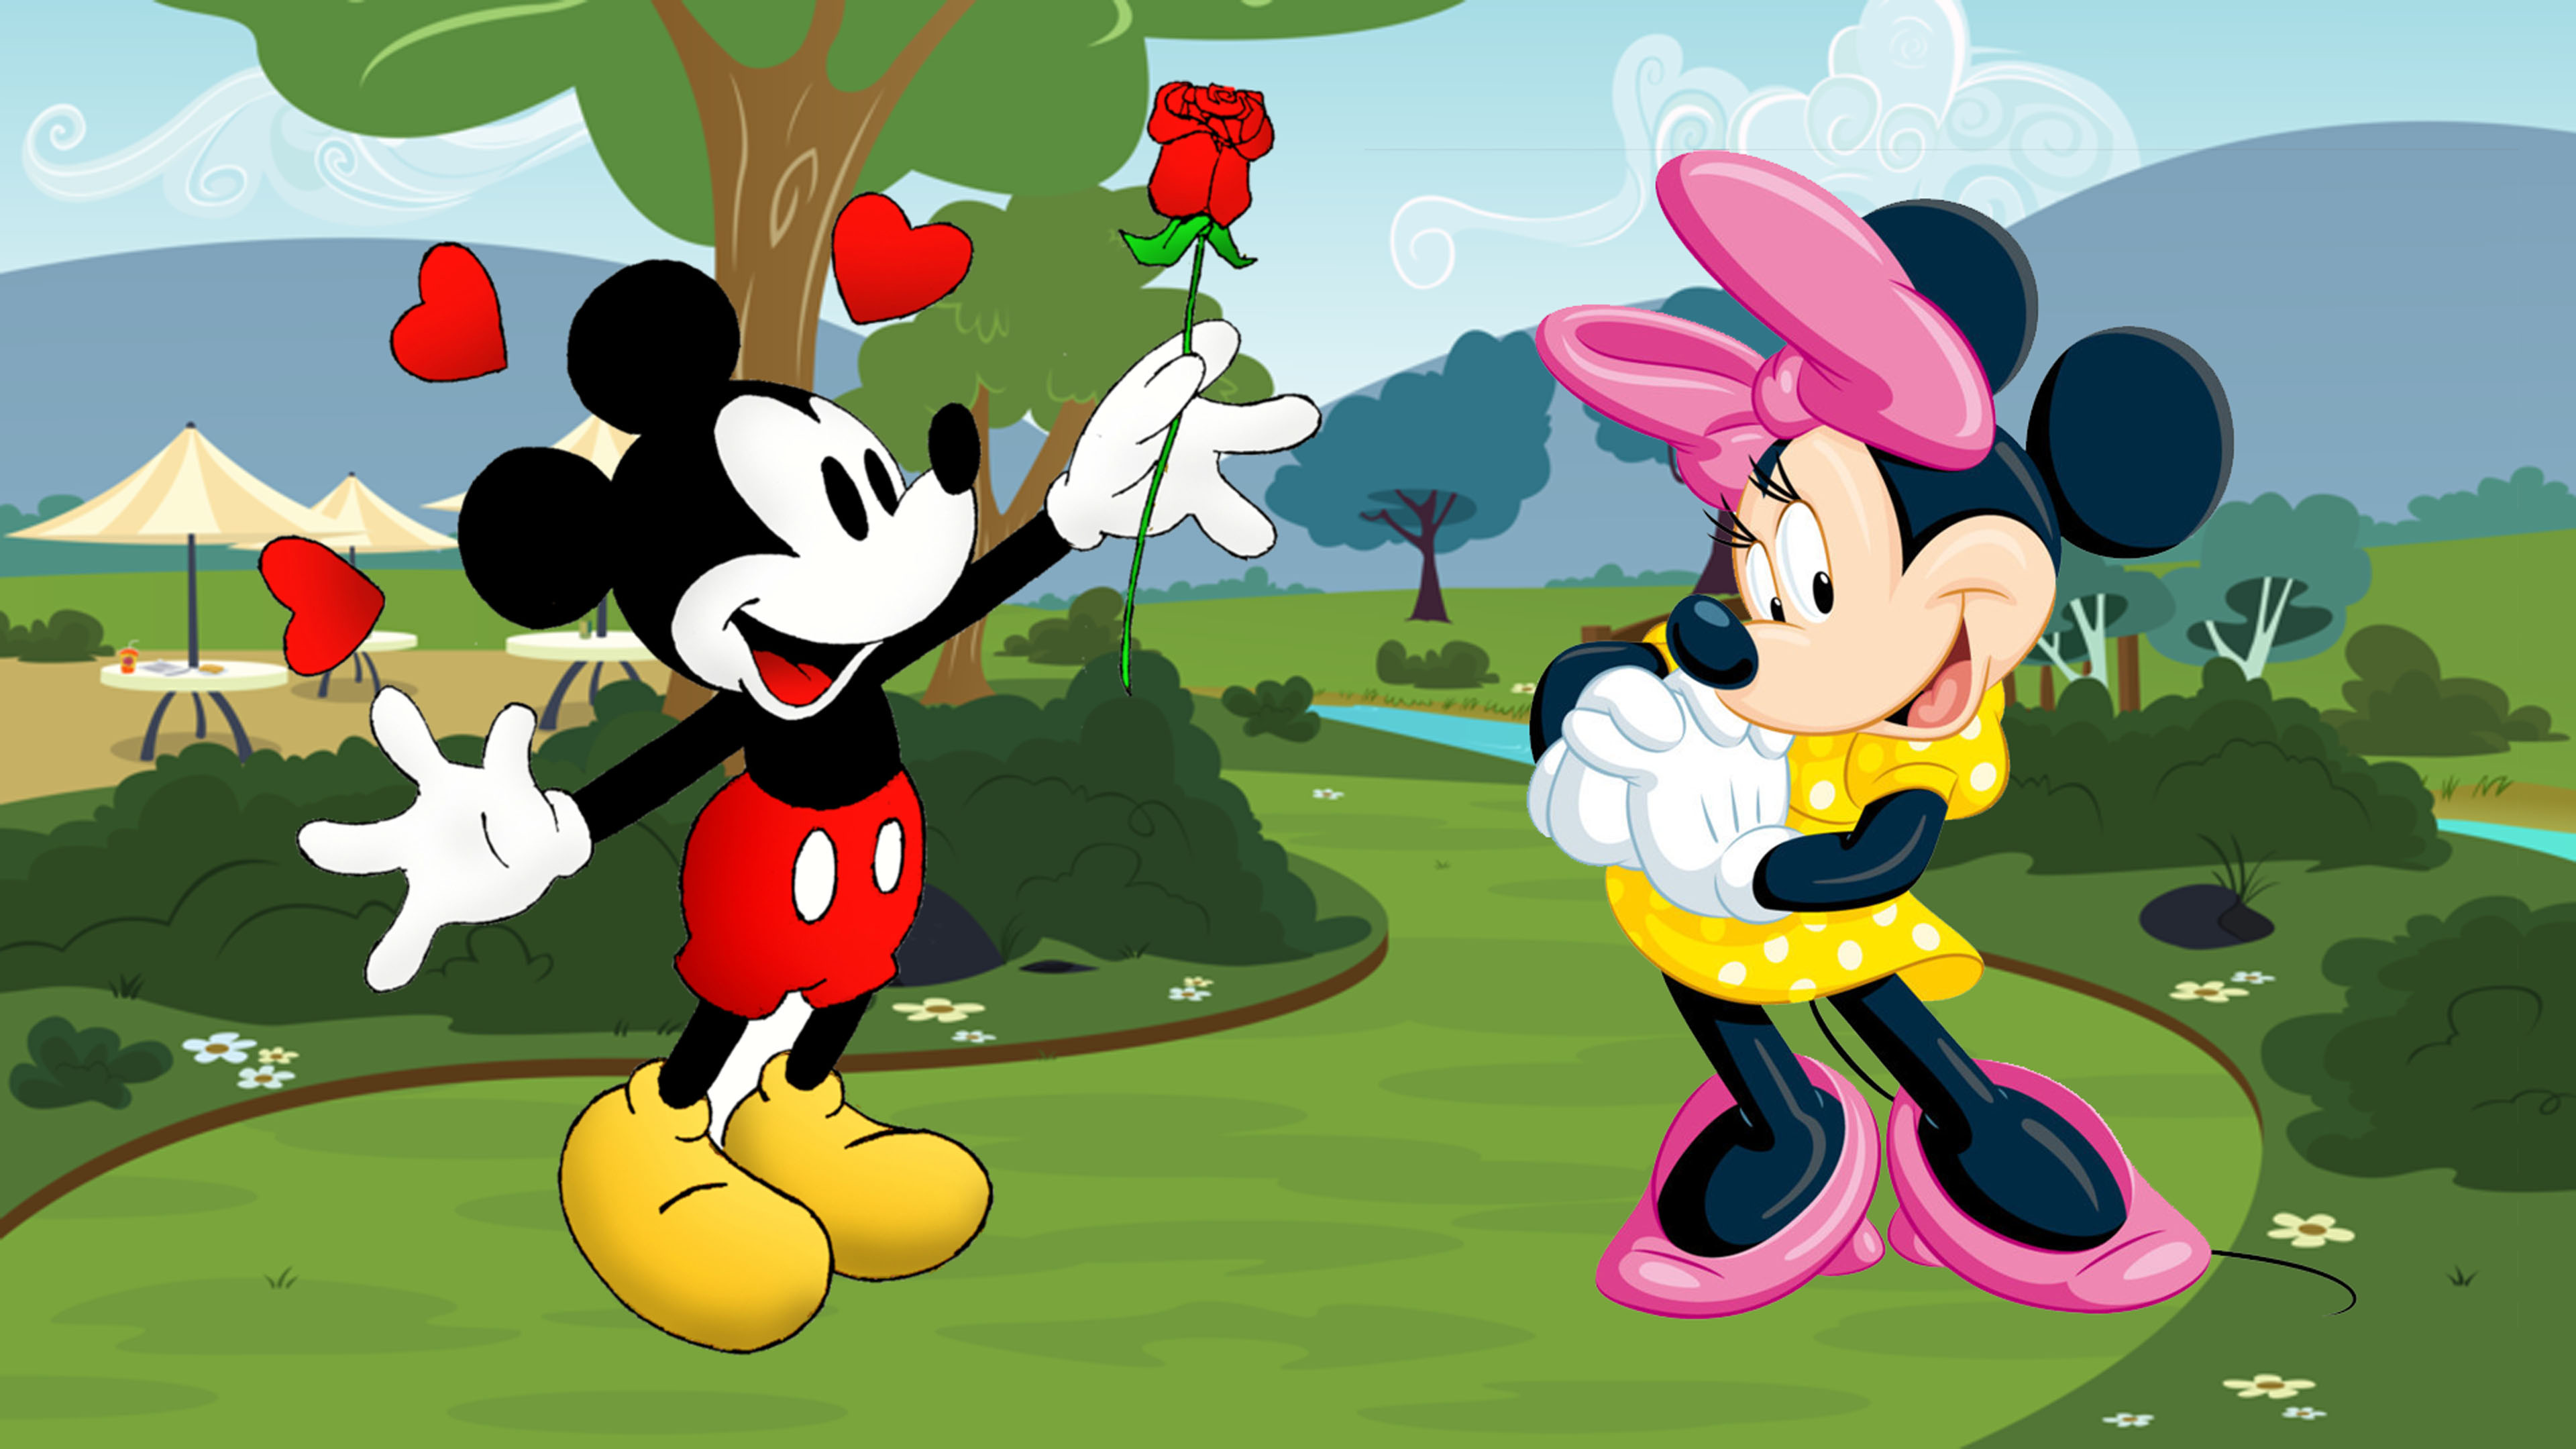 Mickey And Minnie Mouse Cartoon Red Rose For Minnie Love Couple Wallpaper Hd  3840x21600 : 